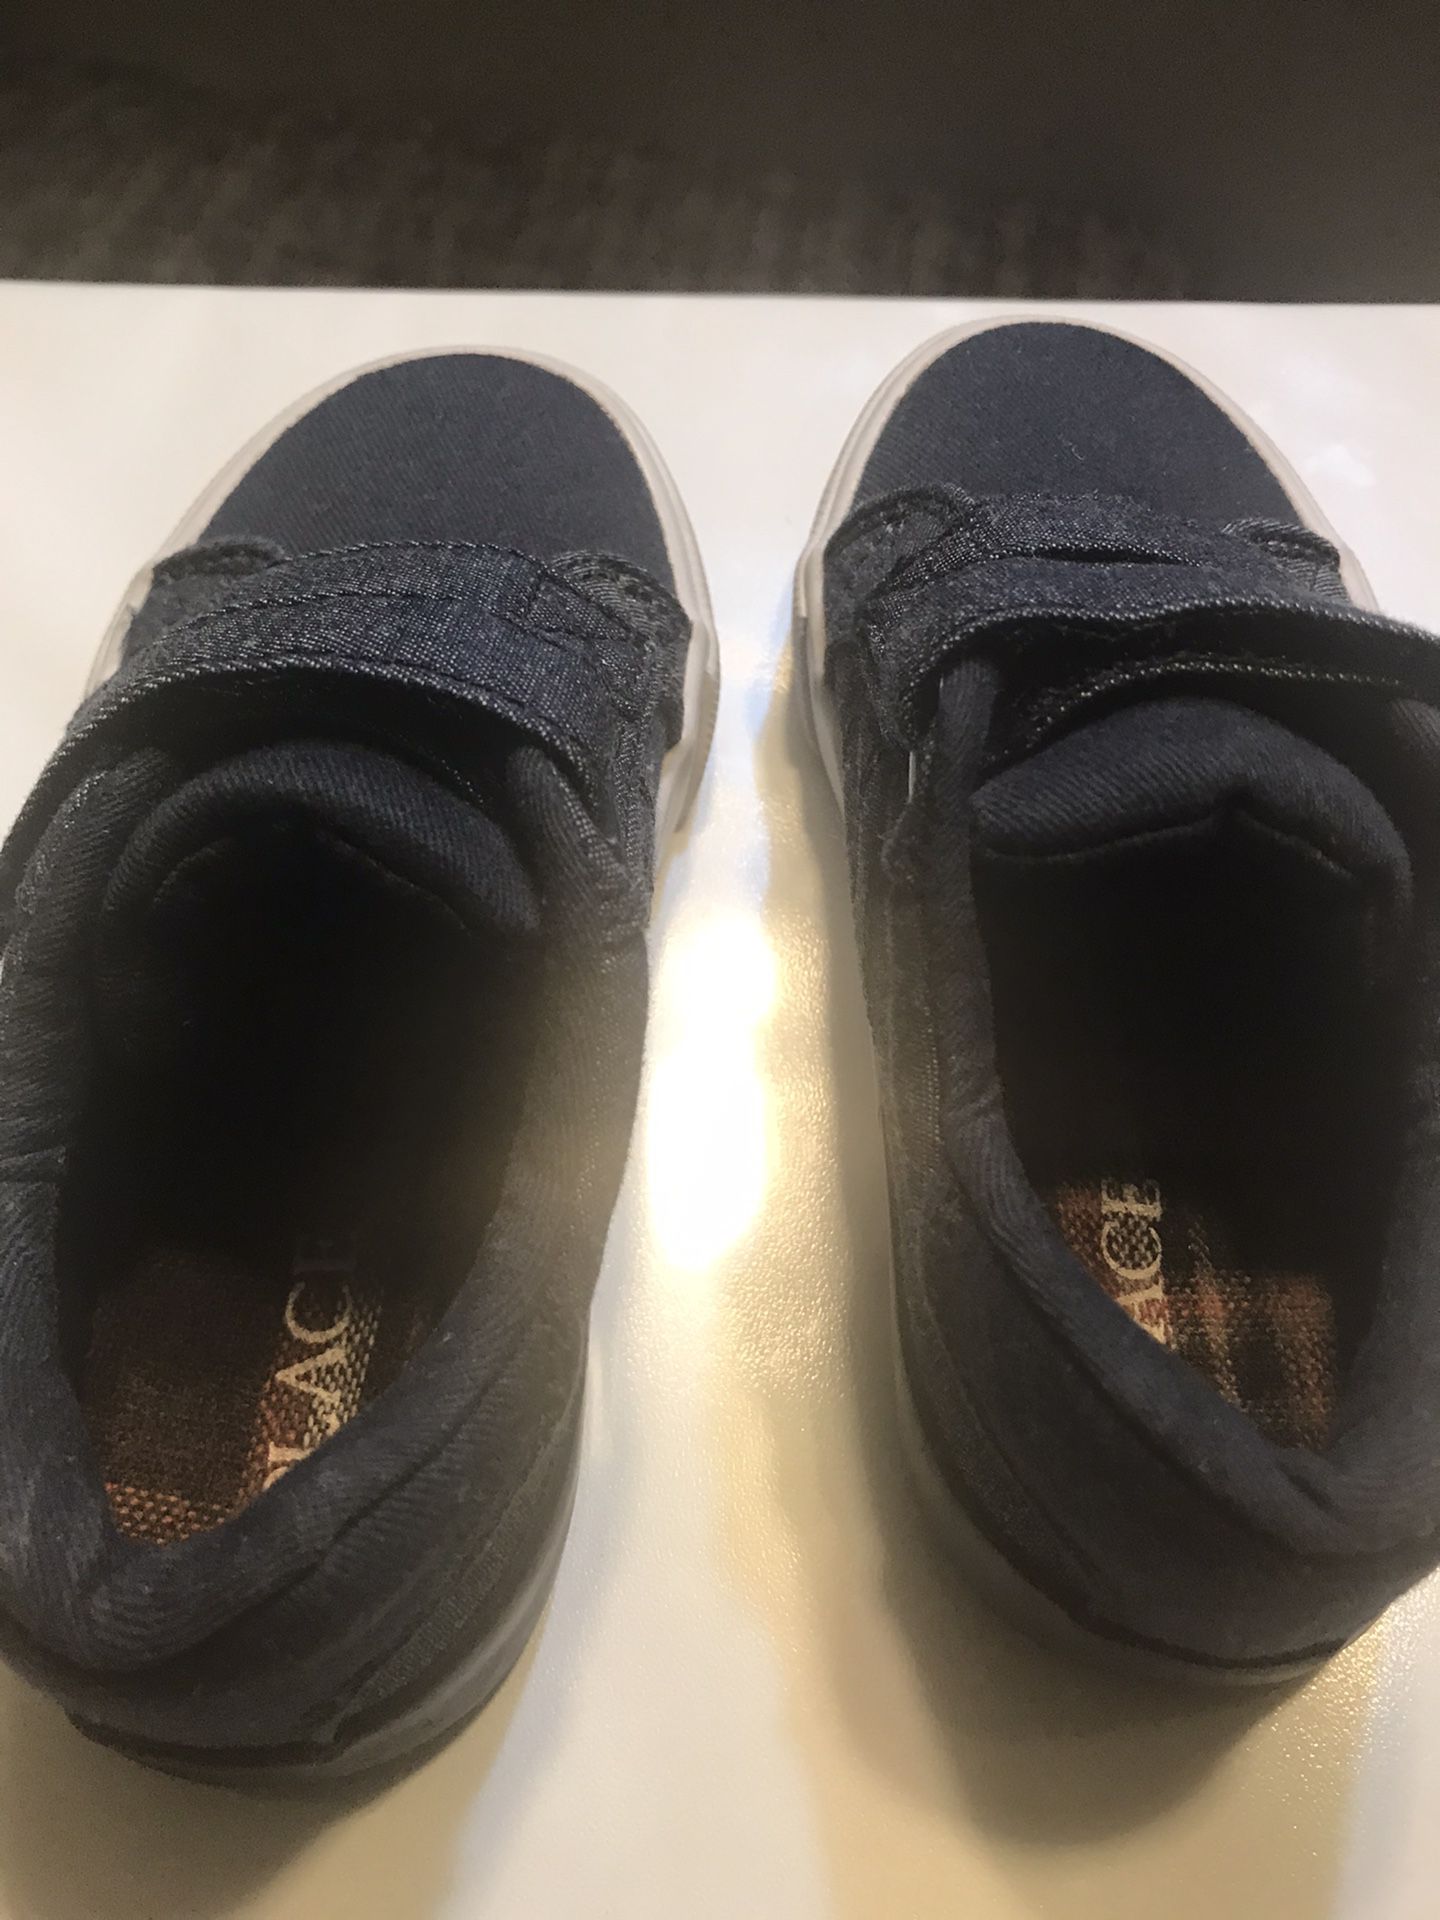 Toddlers Shoes Size 8